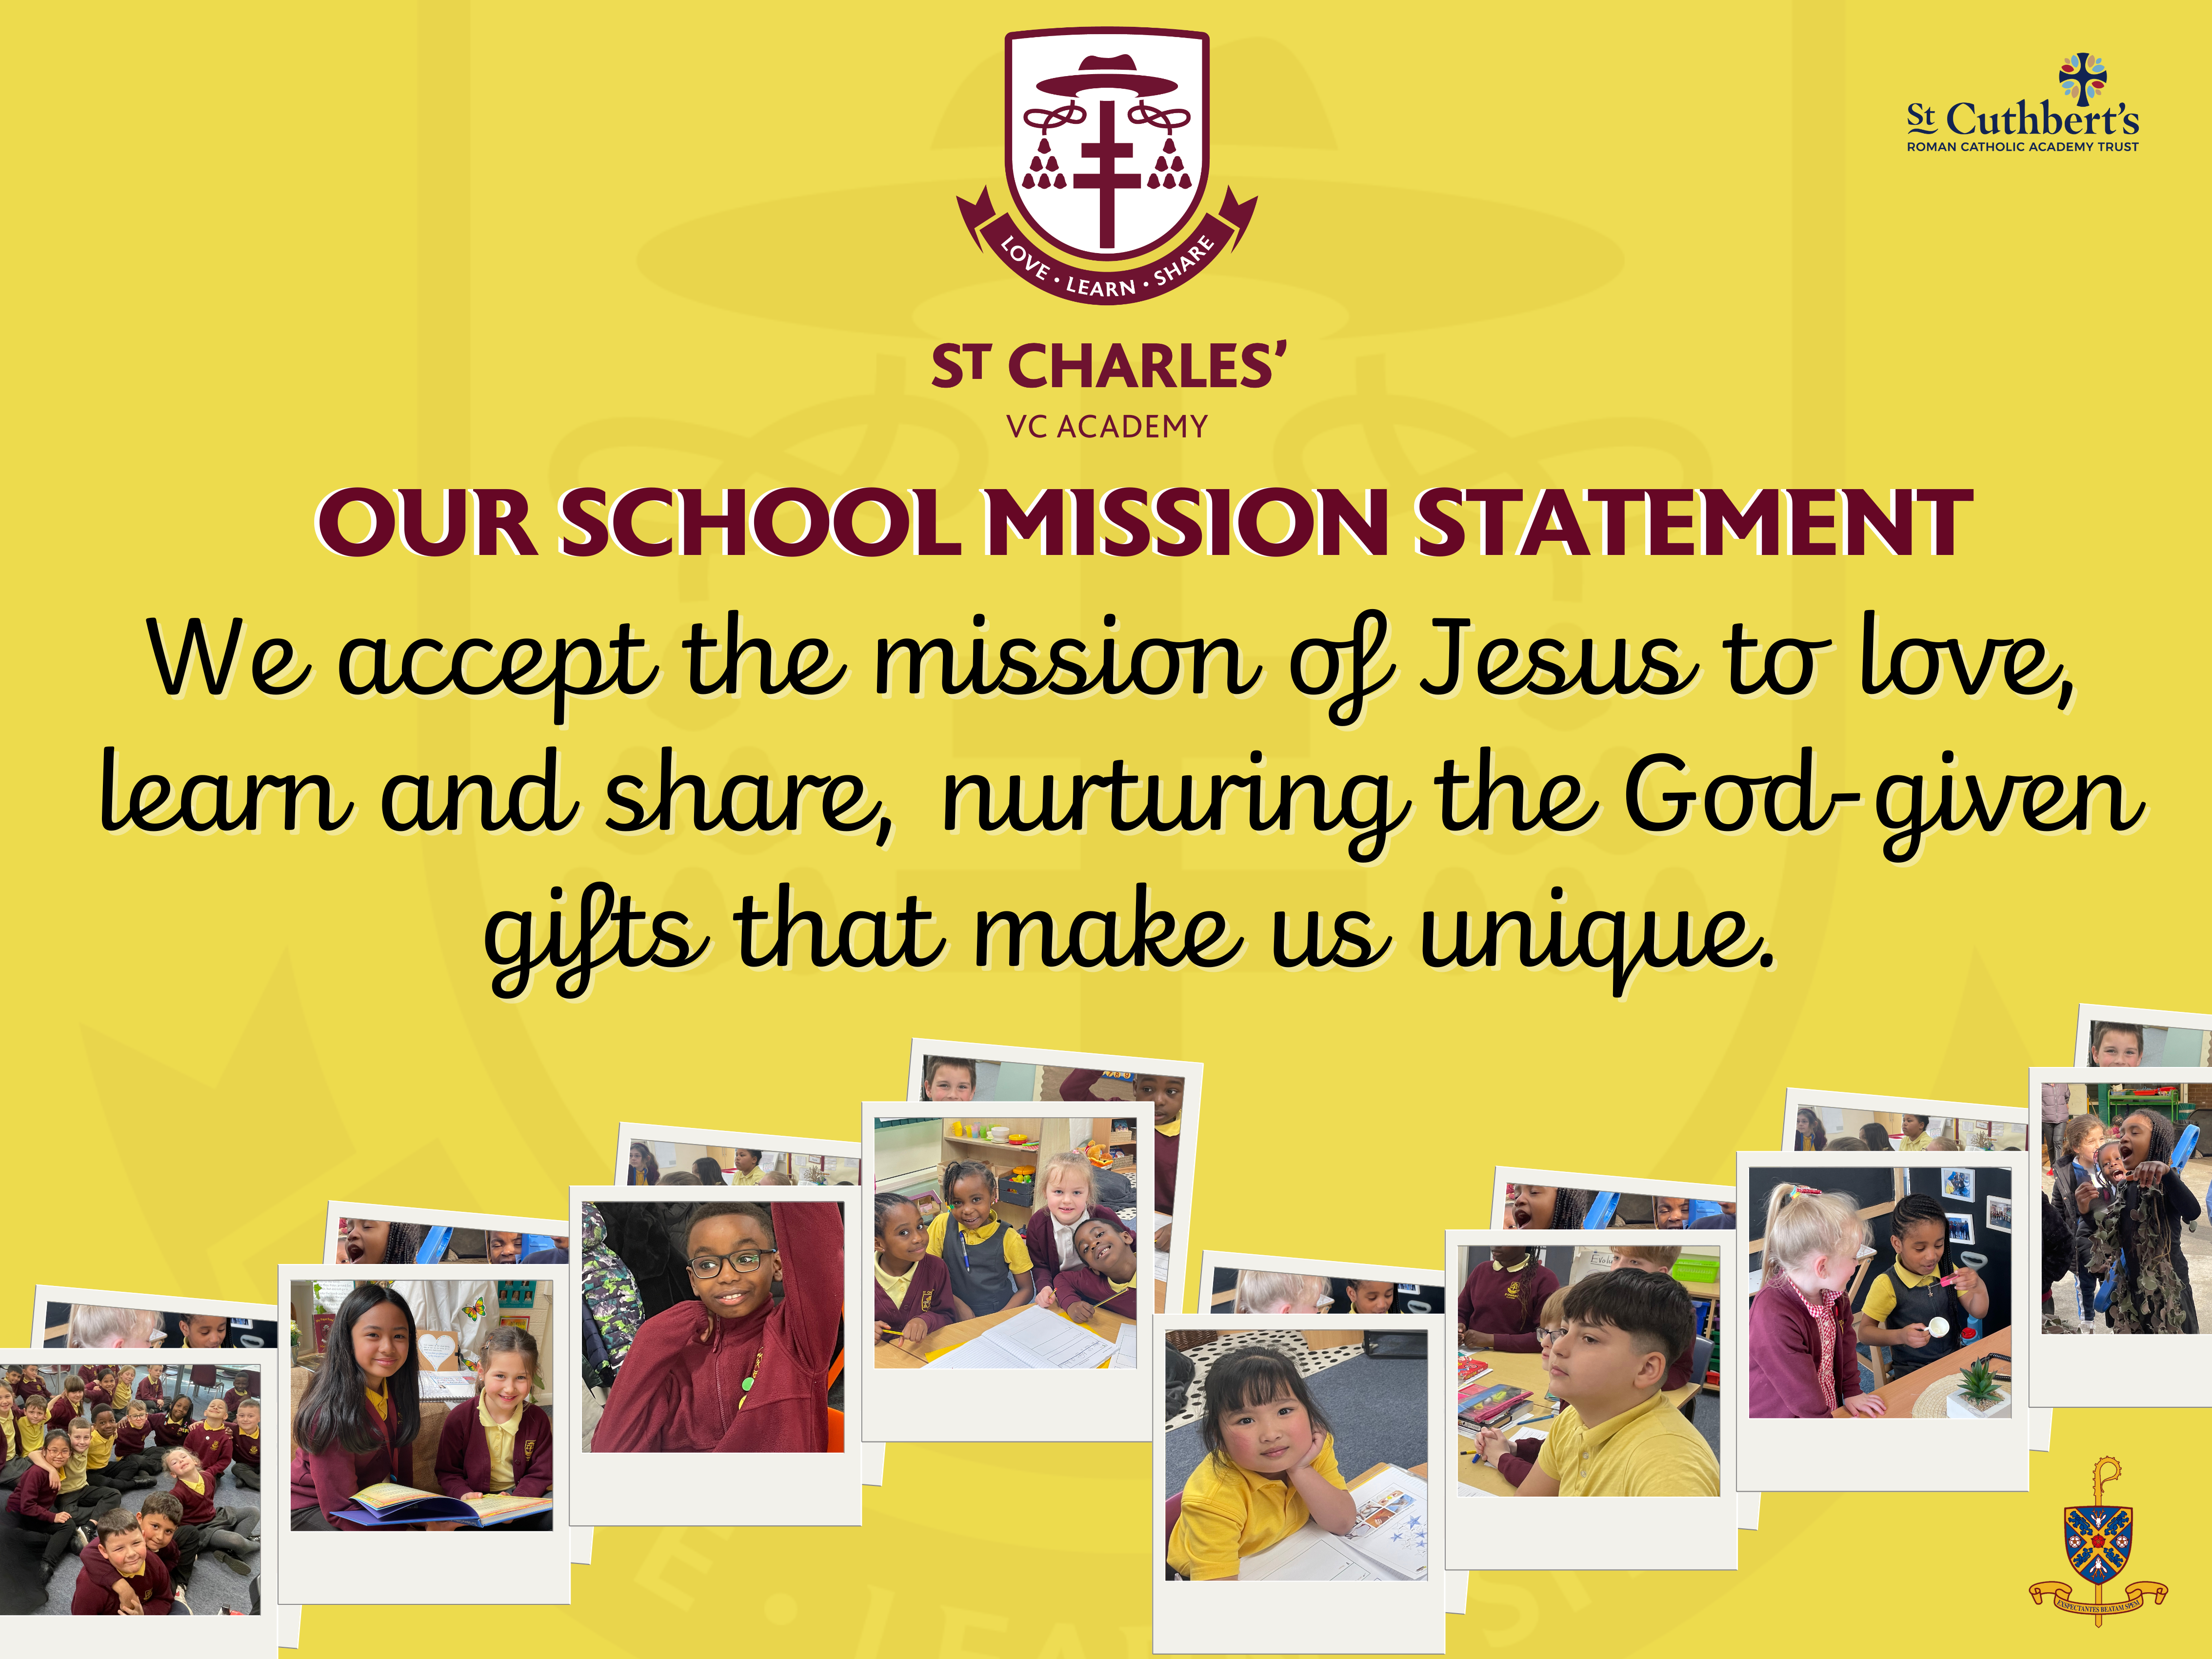 OUR SCHOOL MISSION STATEMENT STC 1200 x 900 mm